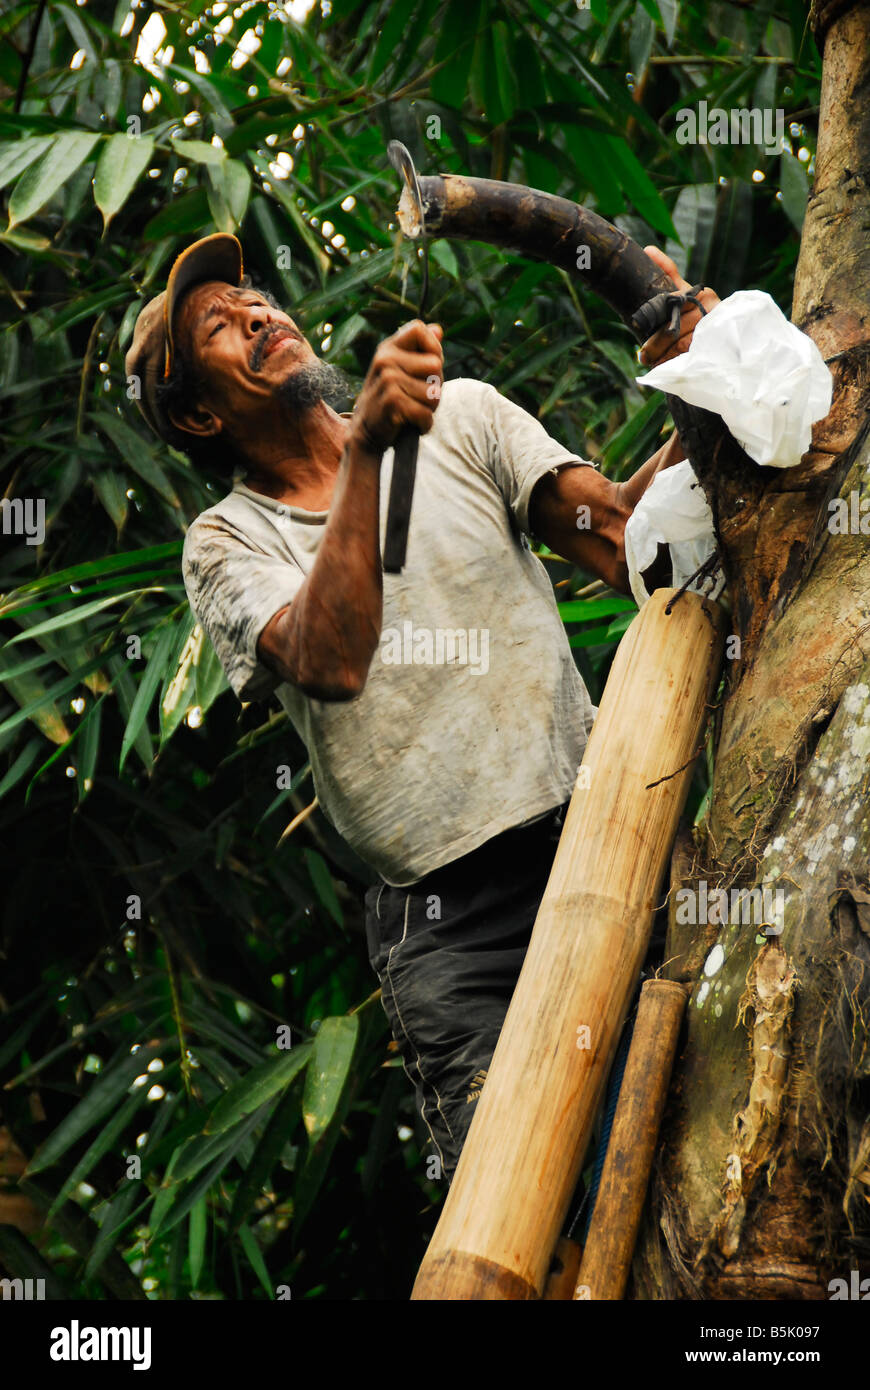 Balinese man is cutting peduncle of palm to collect palm sugar ,Bali,Indonesia. Stock Photo